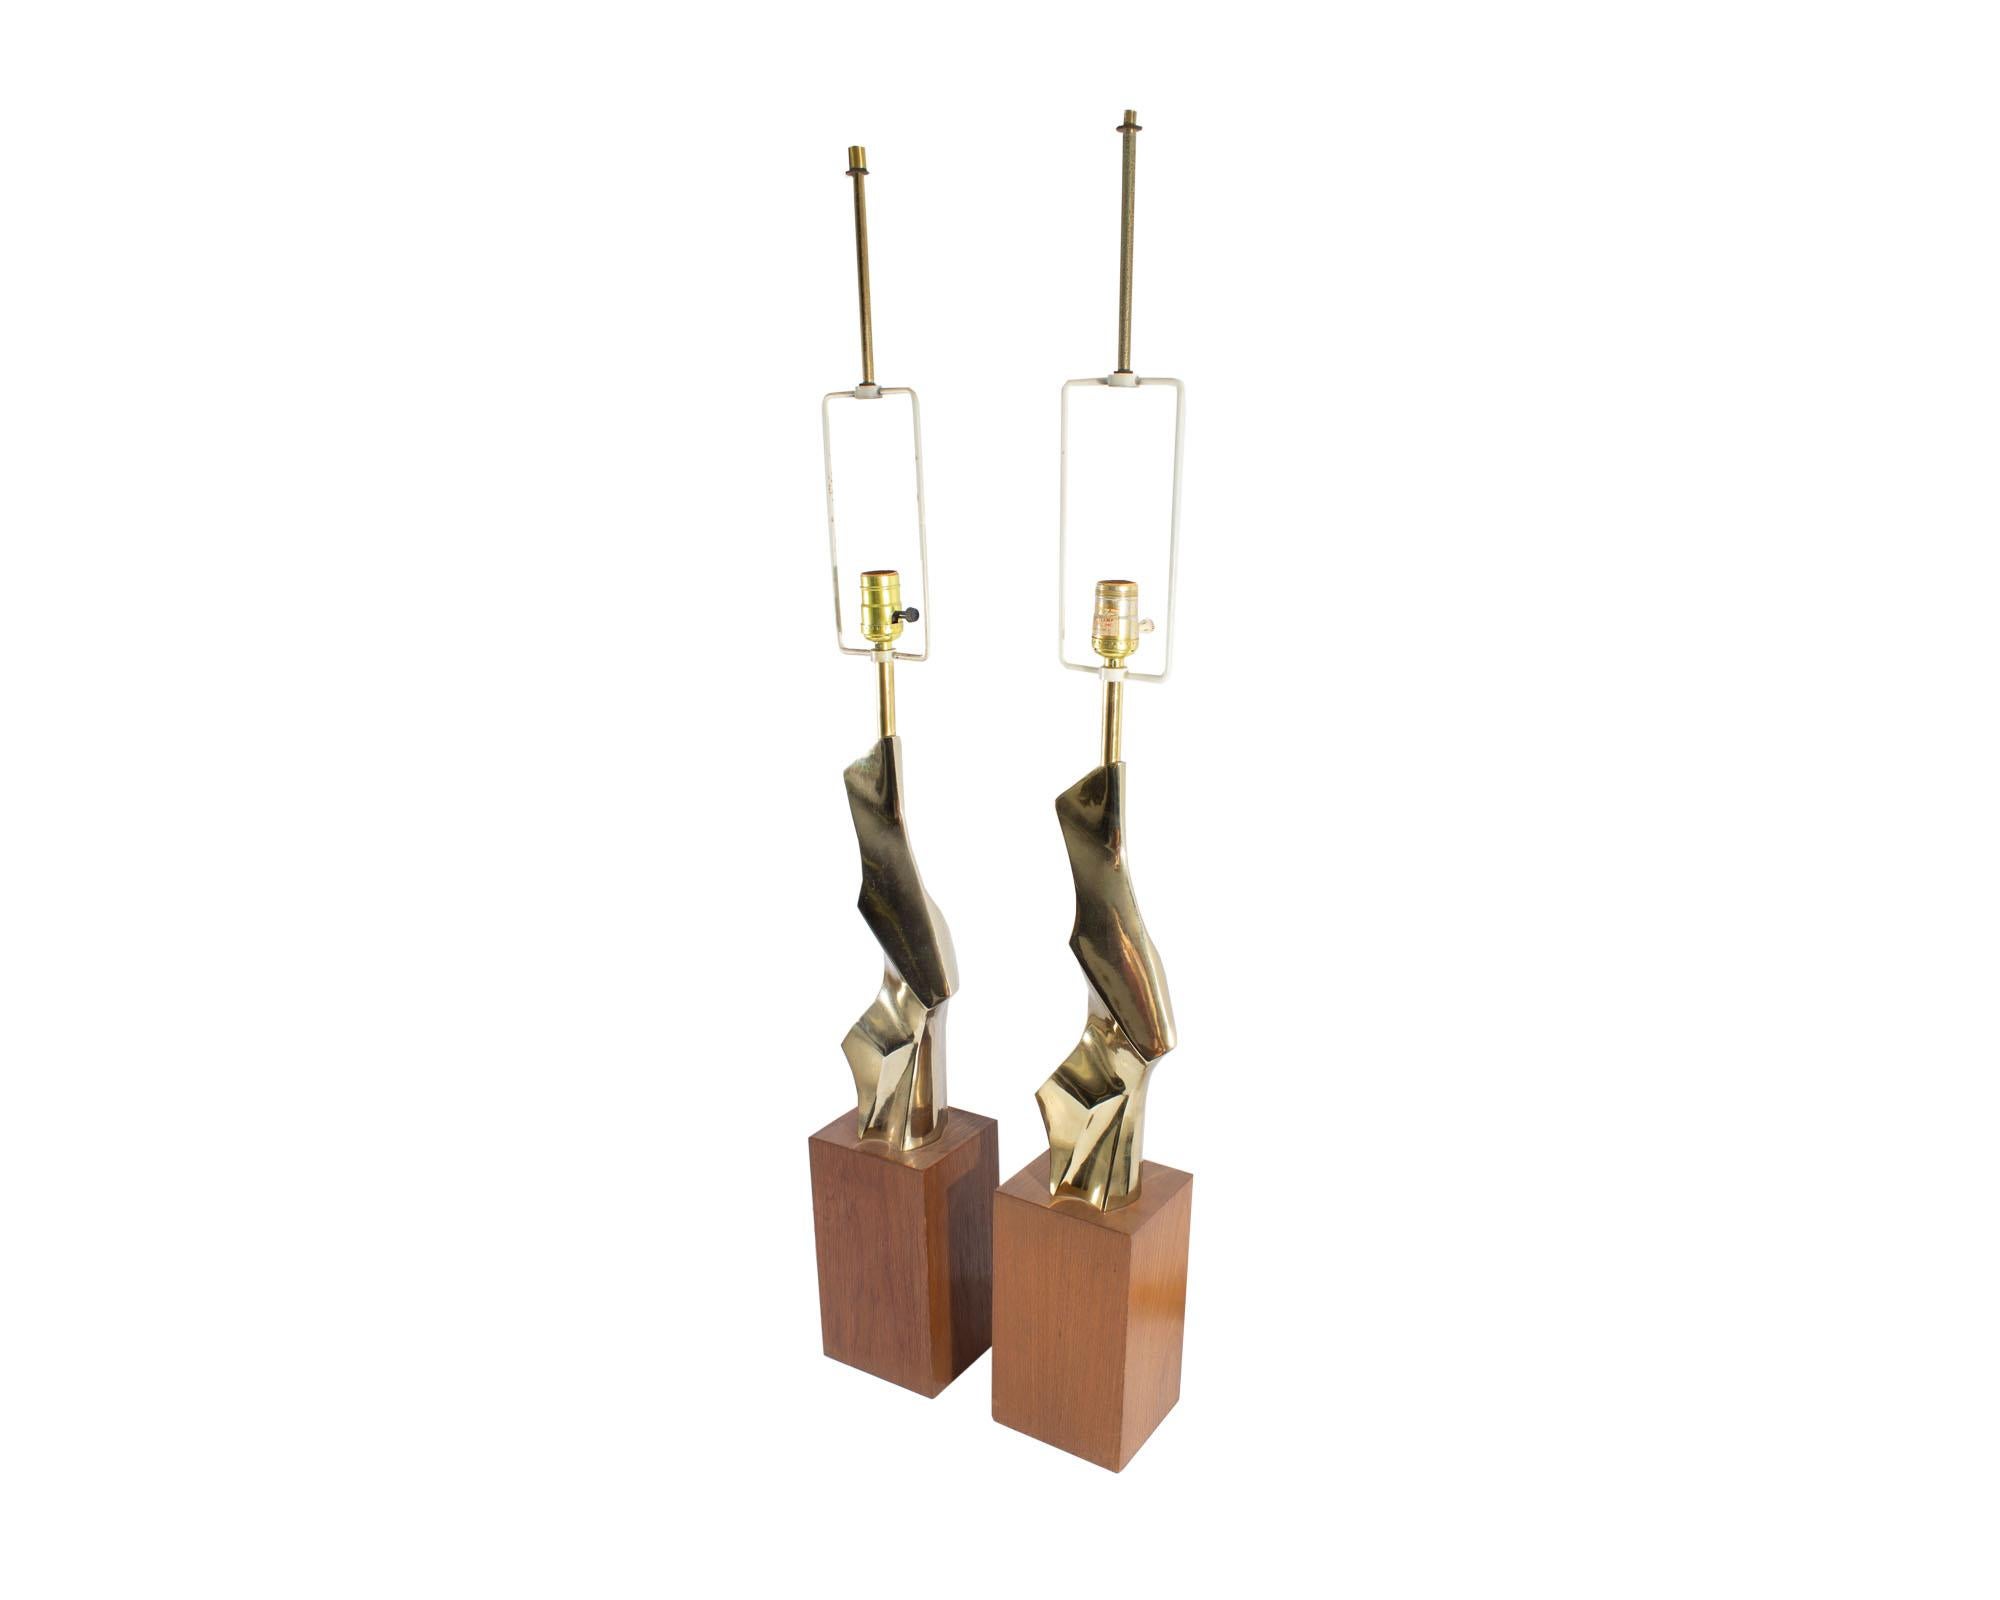 A pair of Mid Century Modern table lamps designed by Richard Barr for the Laurel Lamp Company. These Brutalist table lamps feature a brass abstract form that stands on a wooden base. One of the lamps is marked with a Laurel sticker to its